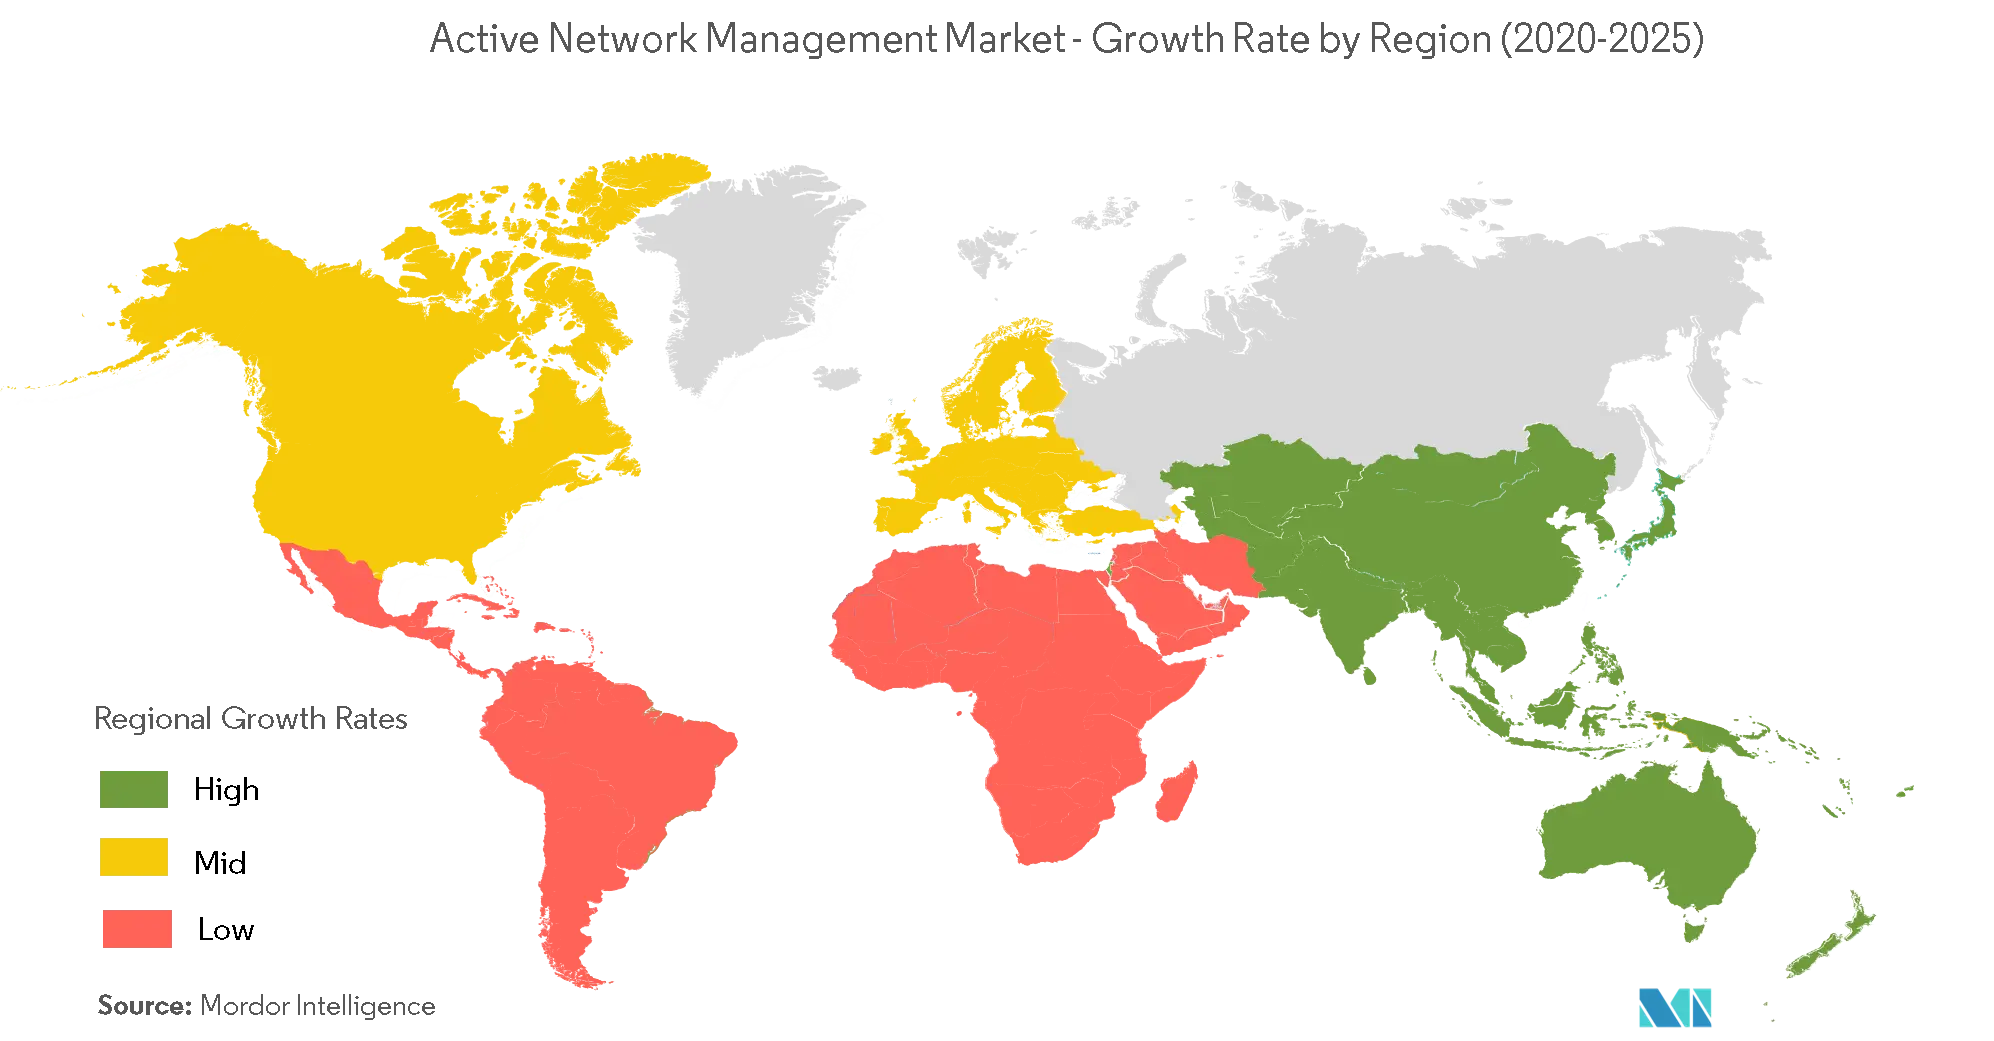 Active Network Management Market Growth Rate